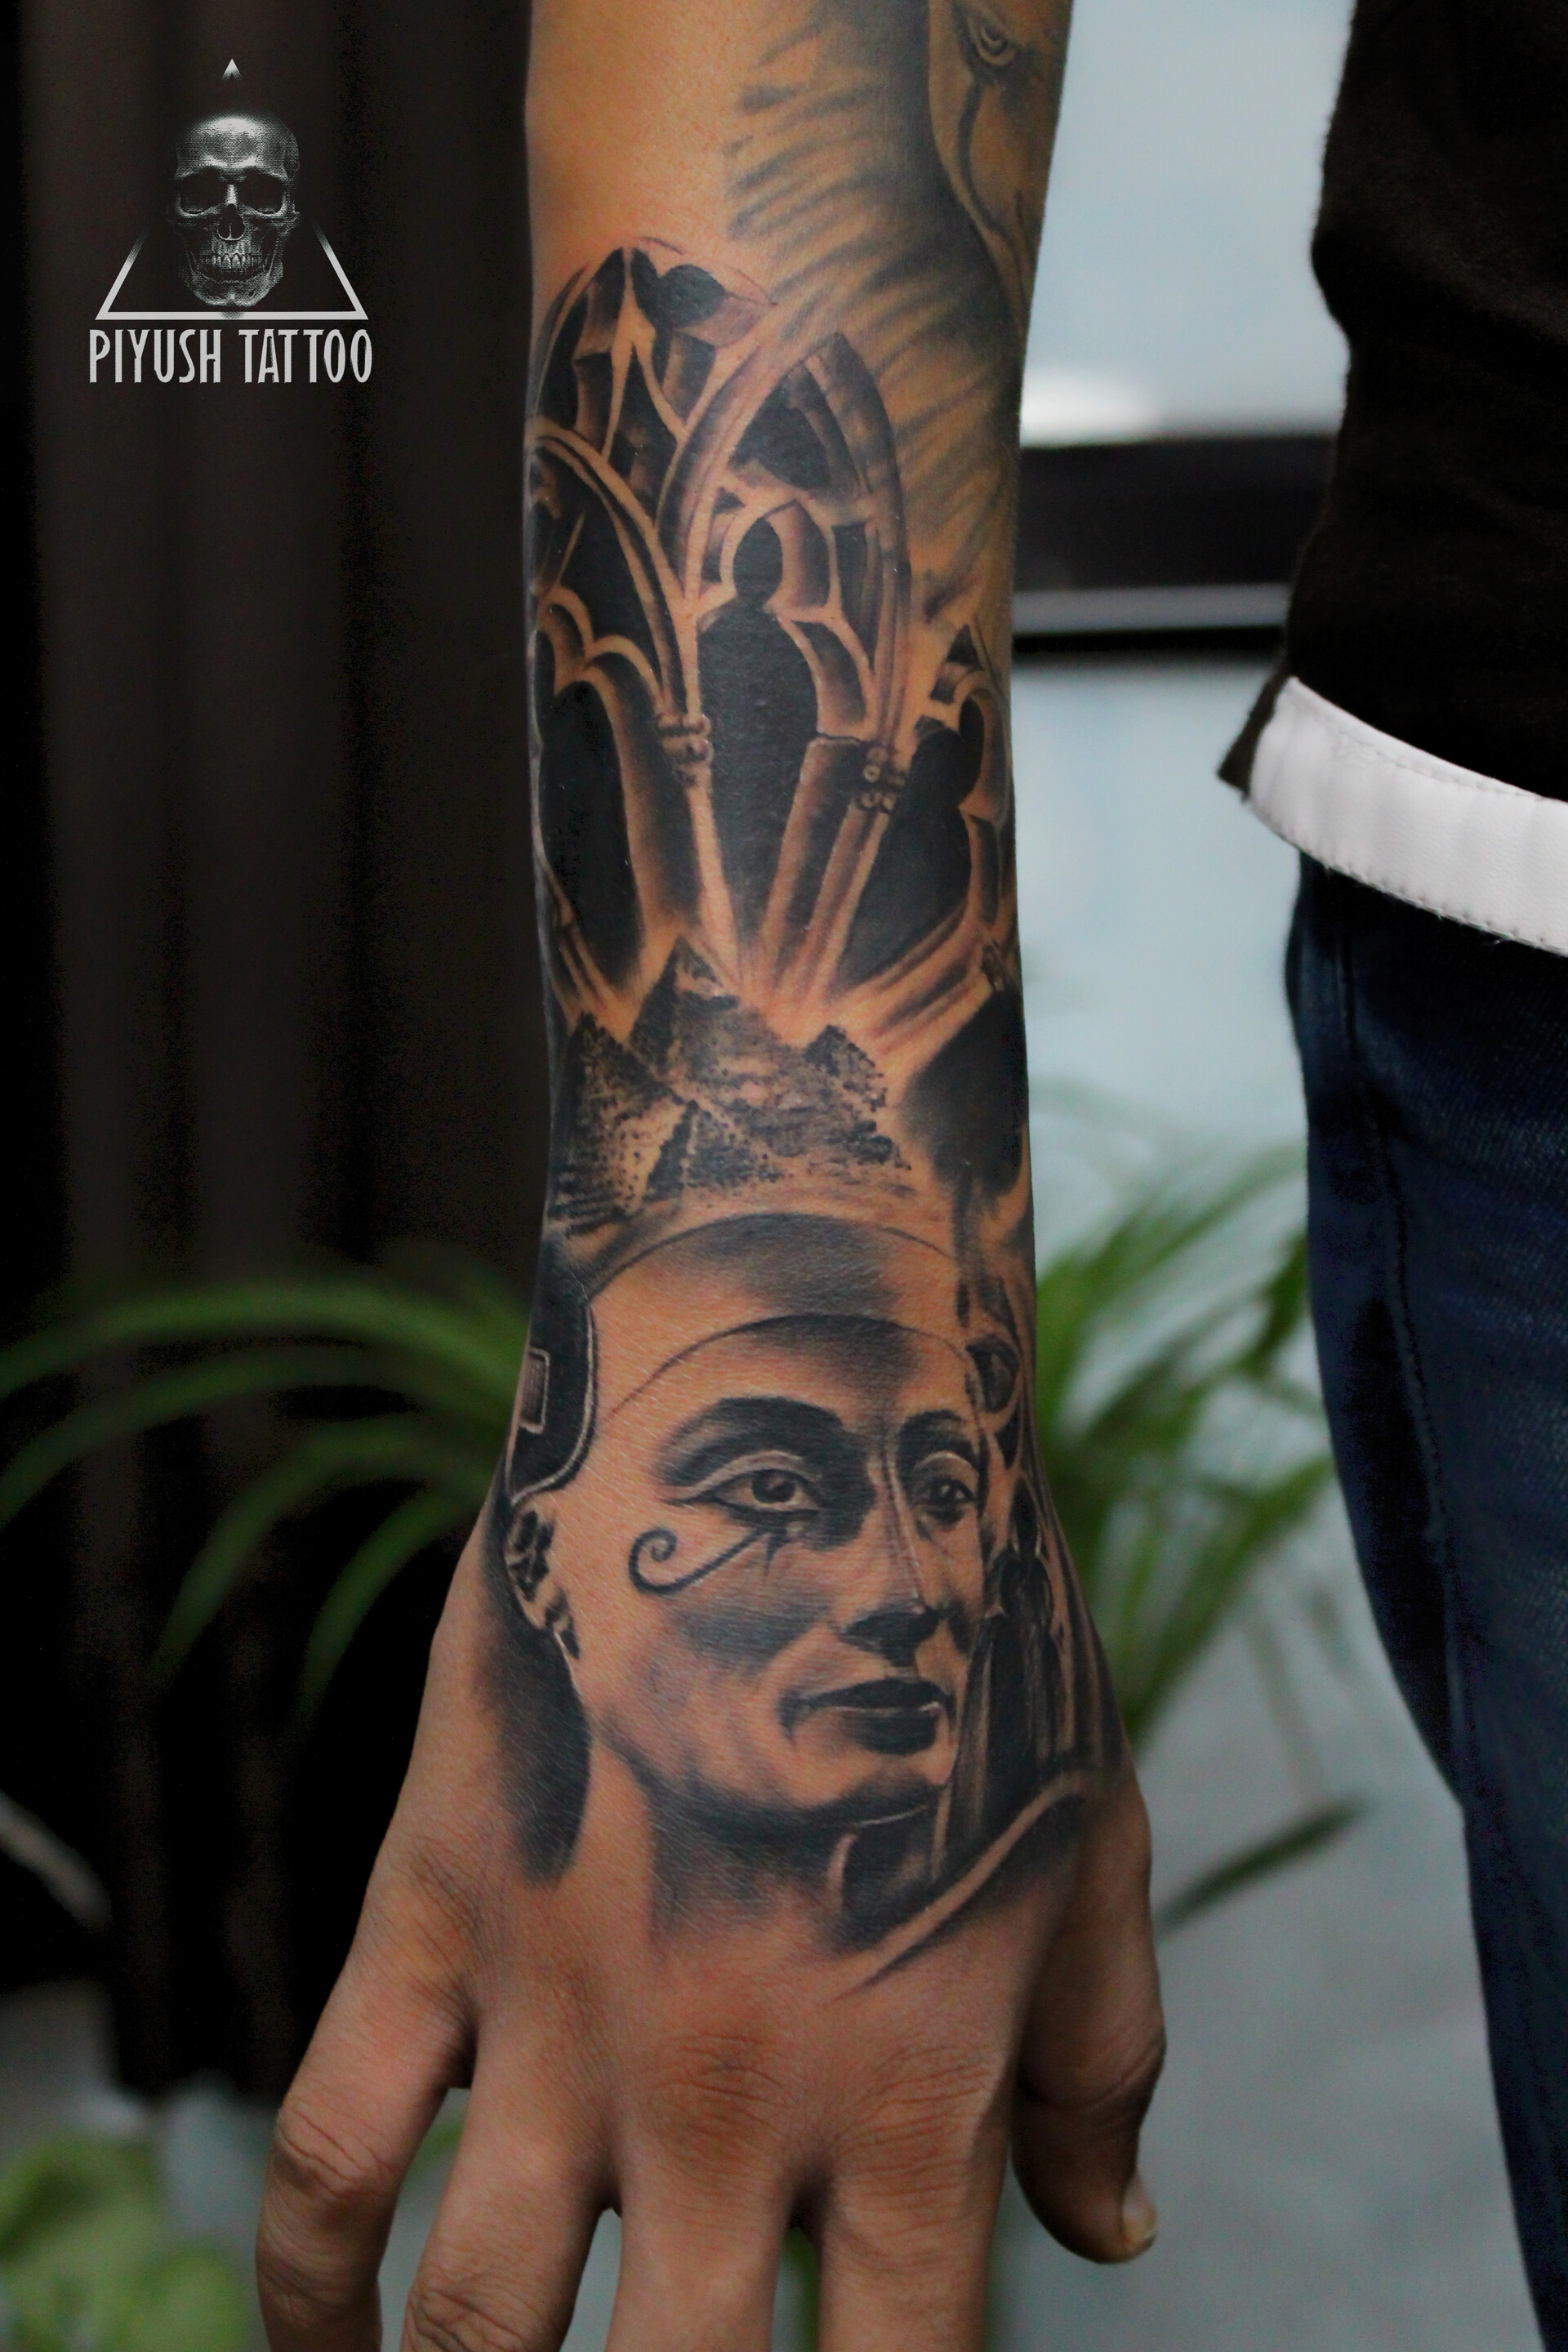 Colored Egyptian Queen Tattoo On Bicep by Fabian de Gaillande